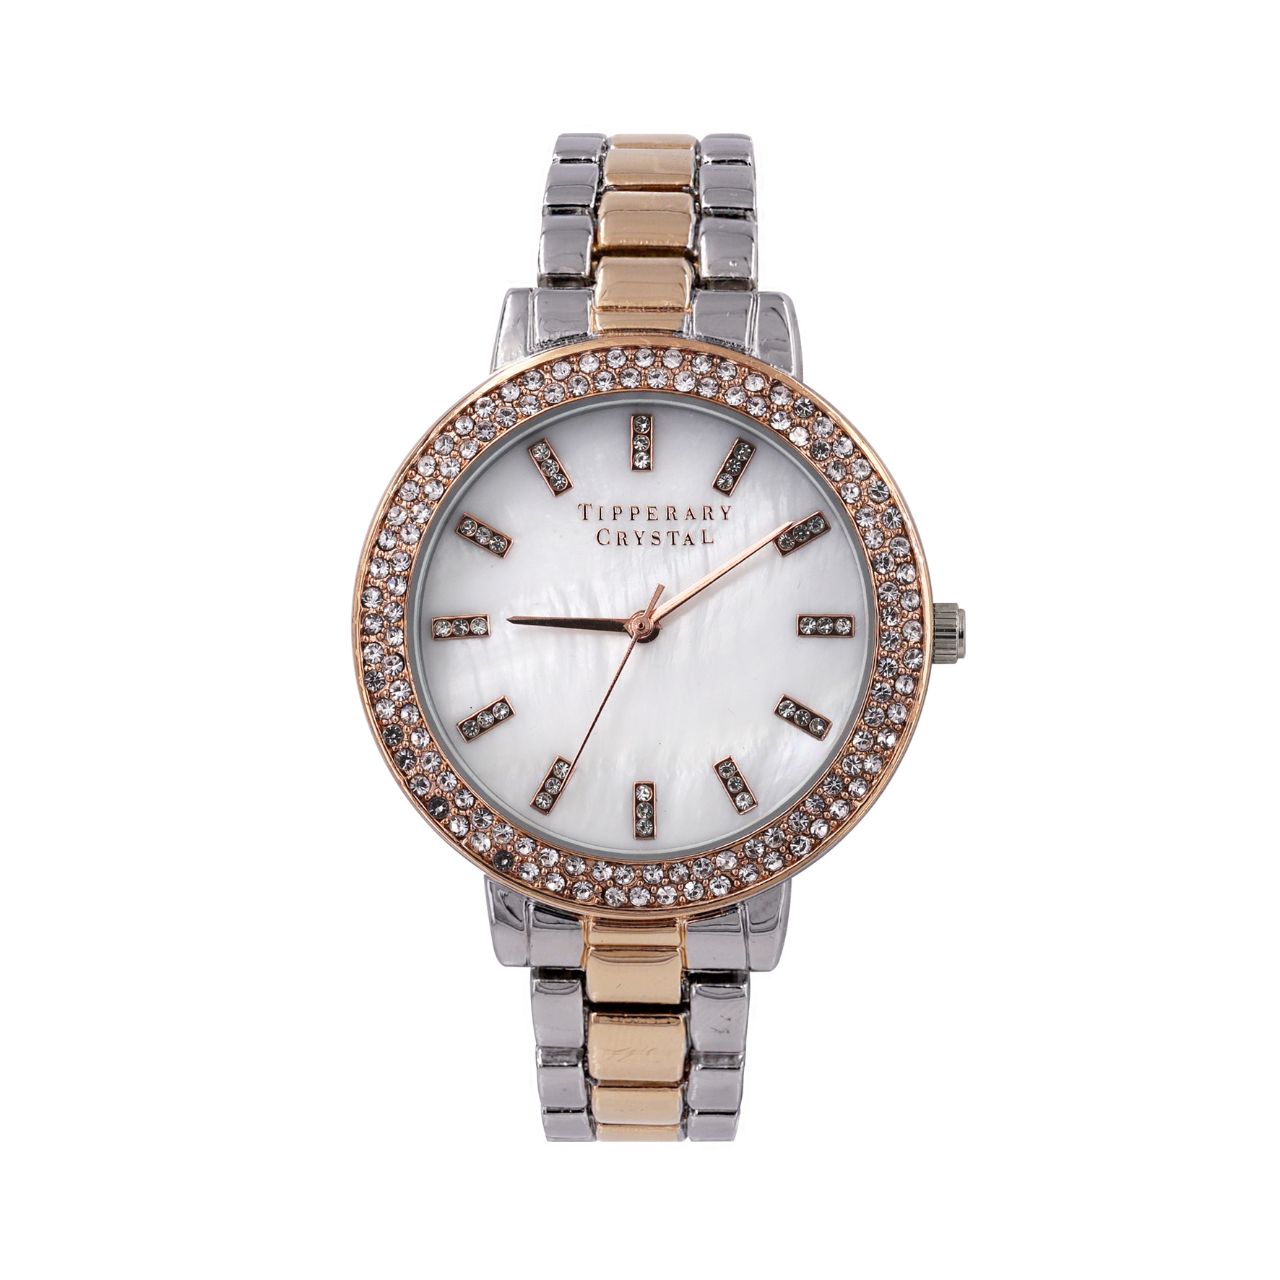 Sophie Rose Gold Watch by Tipperary Crystal  The new Tipperary Crystal Watch Collection is the epitome of refined style. A piece of workmanship which has been designed and created with the finest materials according to the Tipperary Crystal family tradition of excellence.